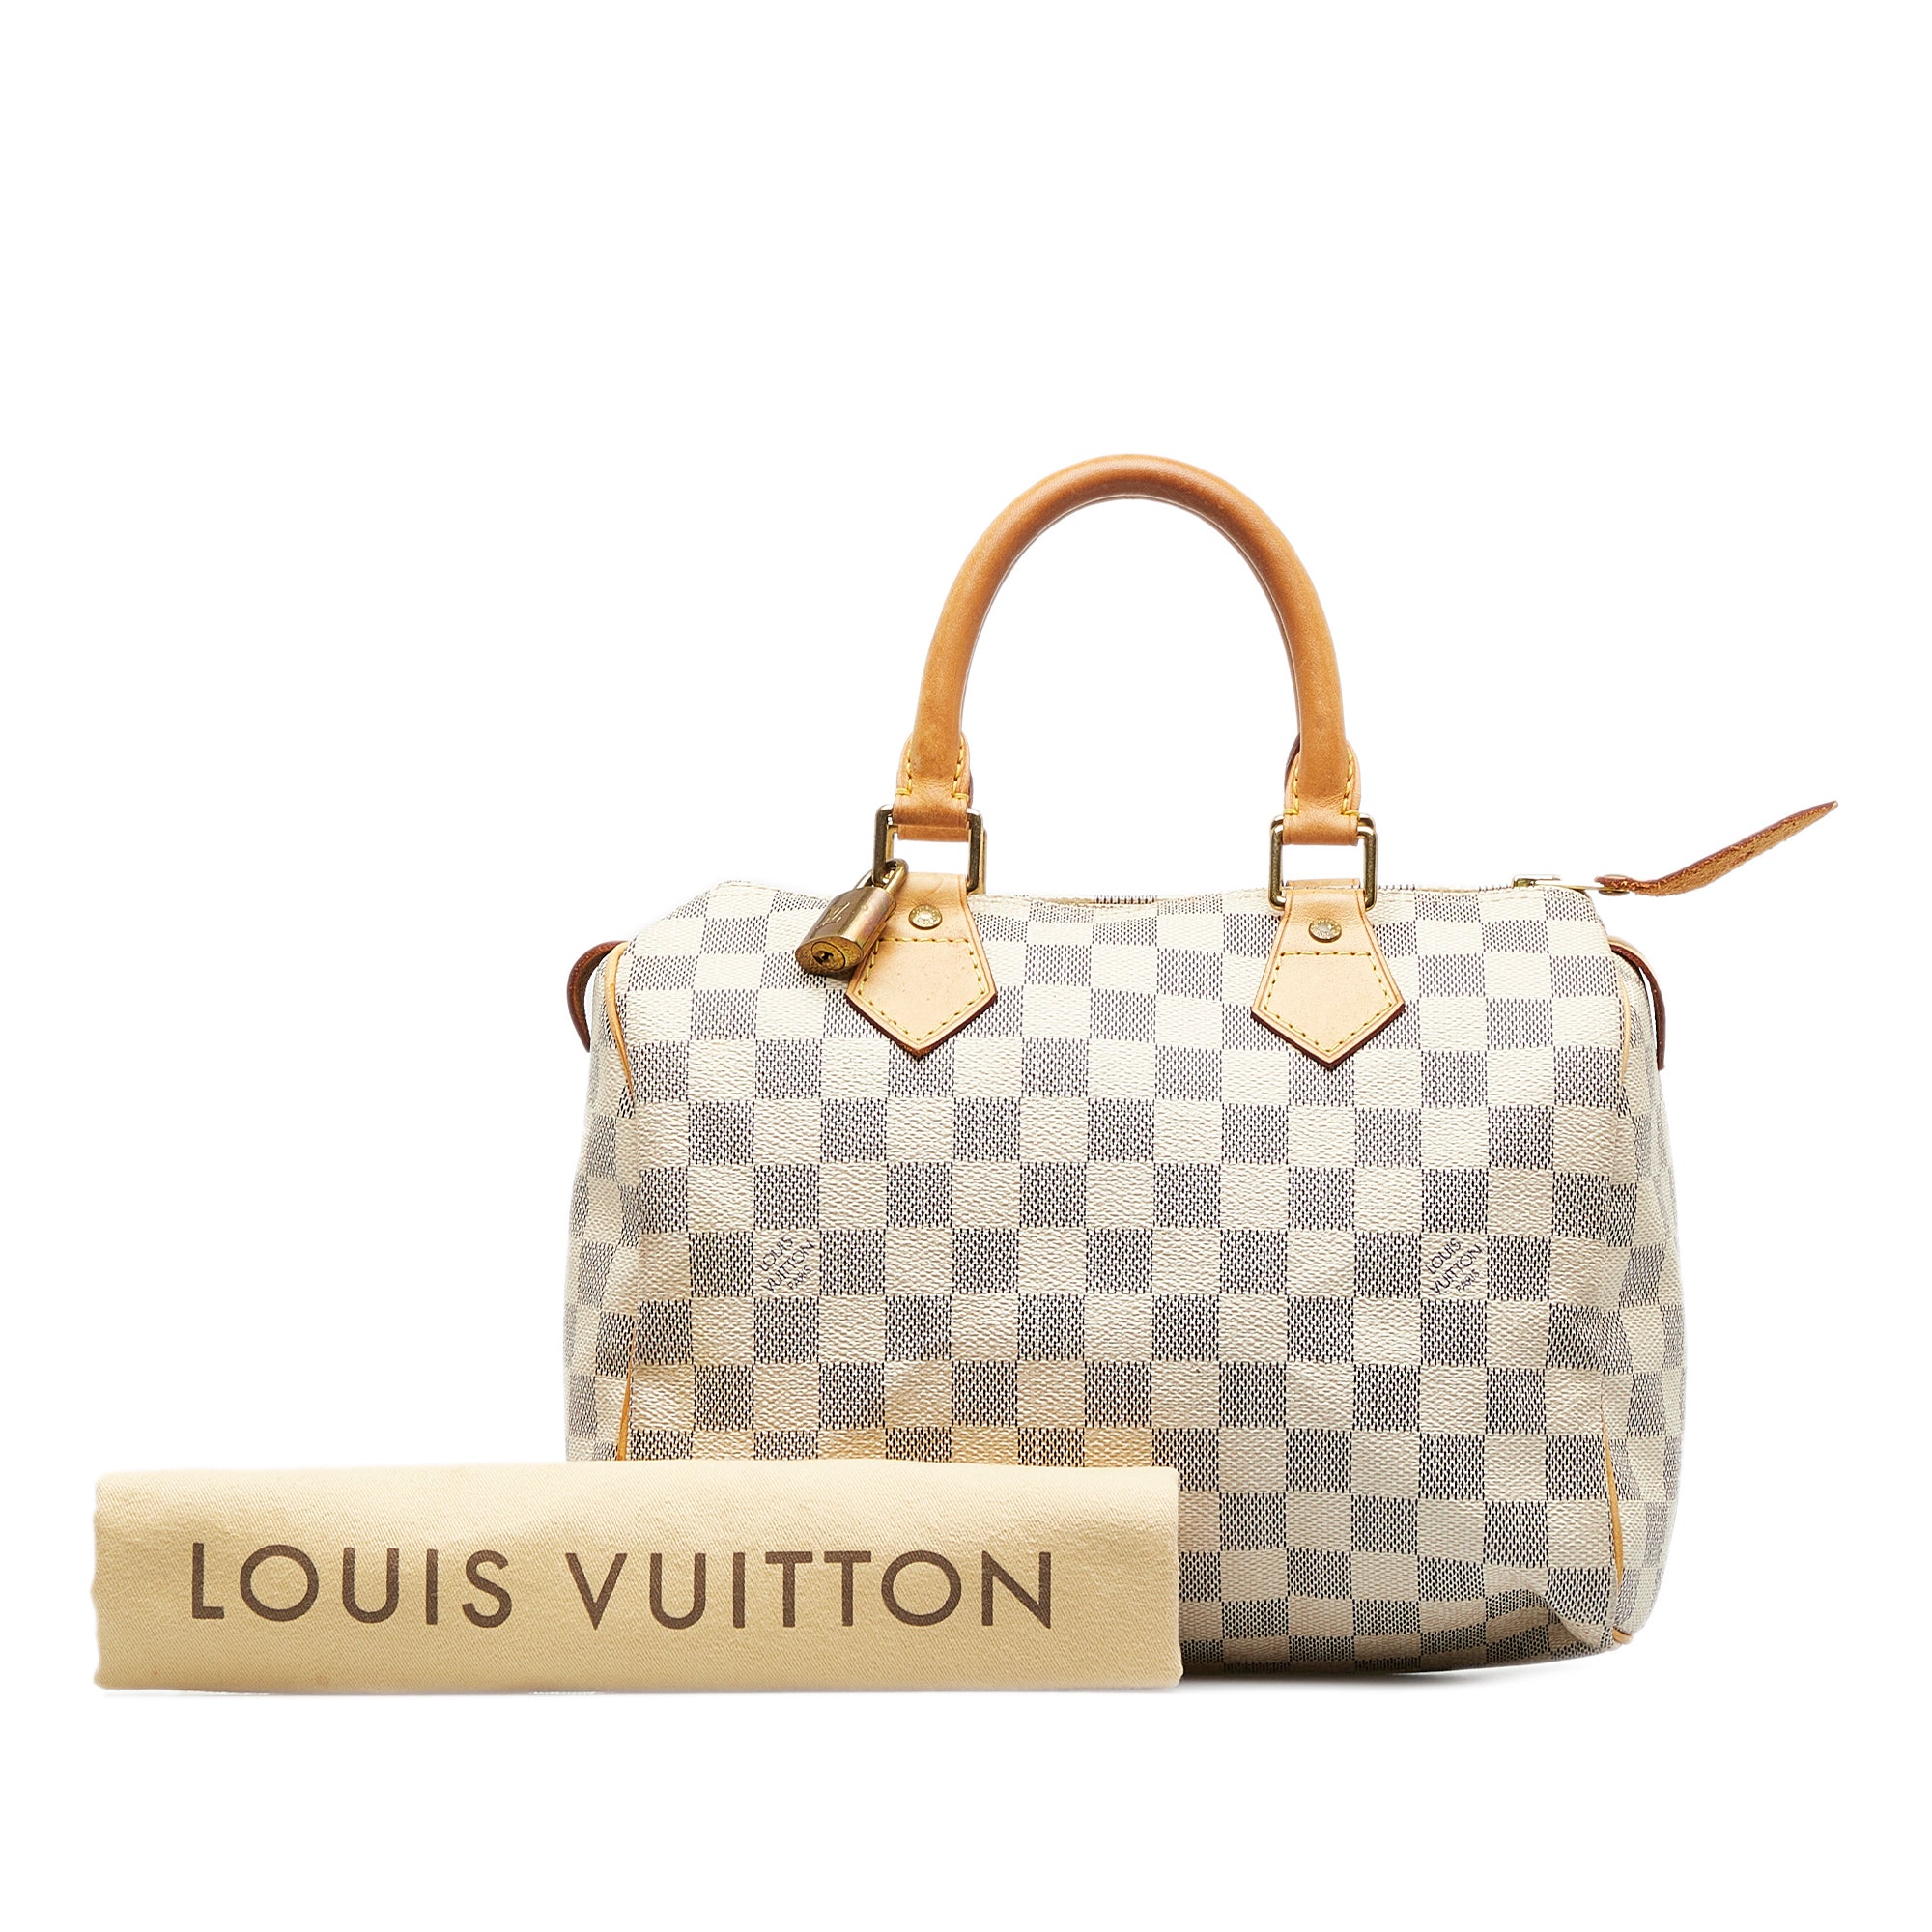 Louis Vuitton Bags South Africa  Pre-owned Louis Vuitton Bags in South  Africa